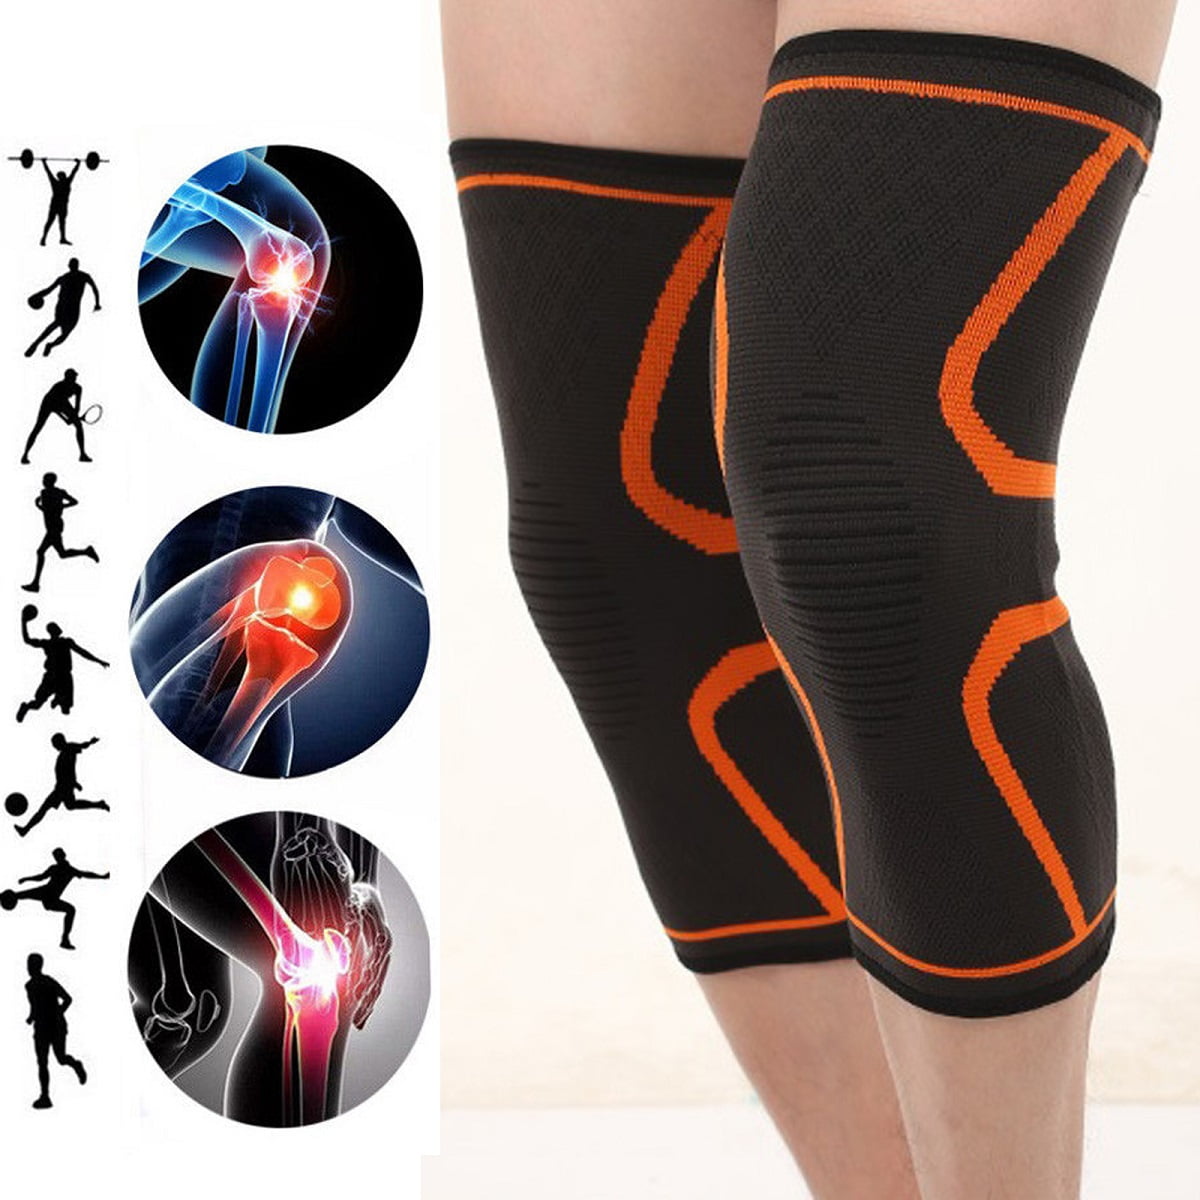 Details about   Copper Knee Support Compression Sleeve Brace Sport Joint Pain Relief Arthritis D 